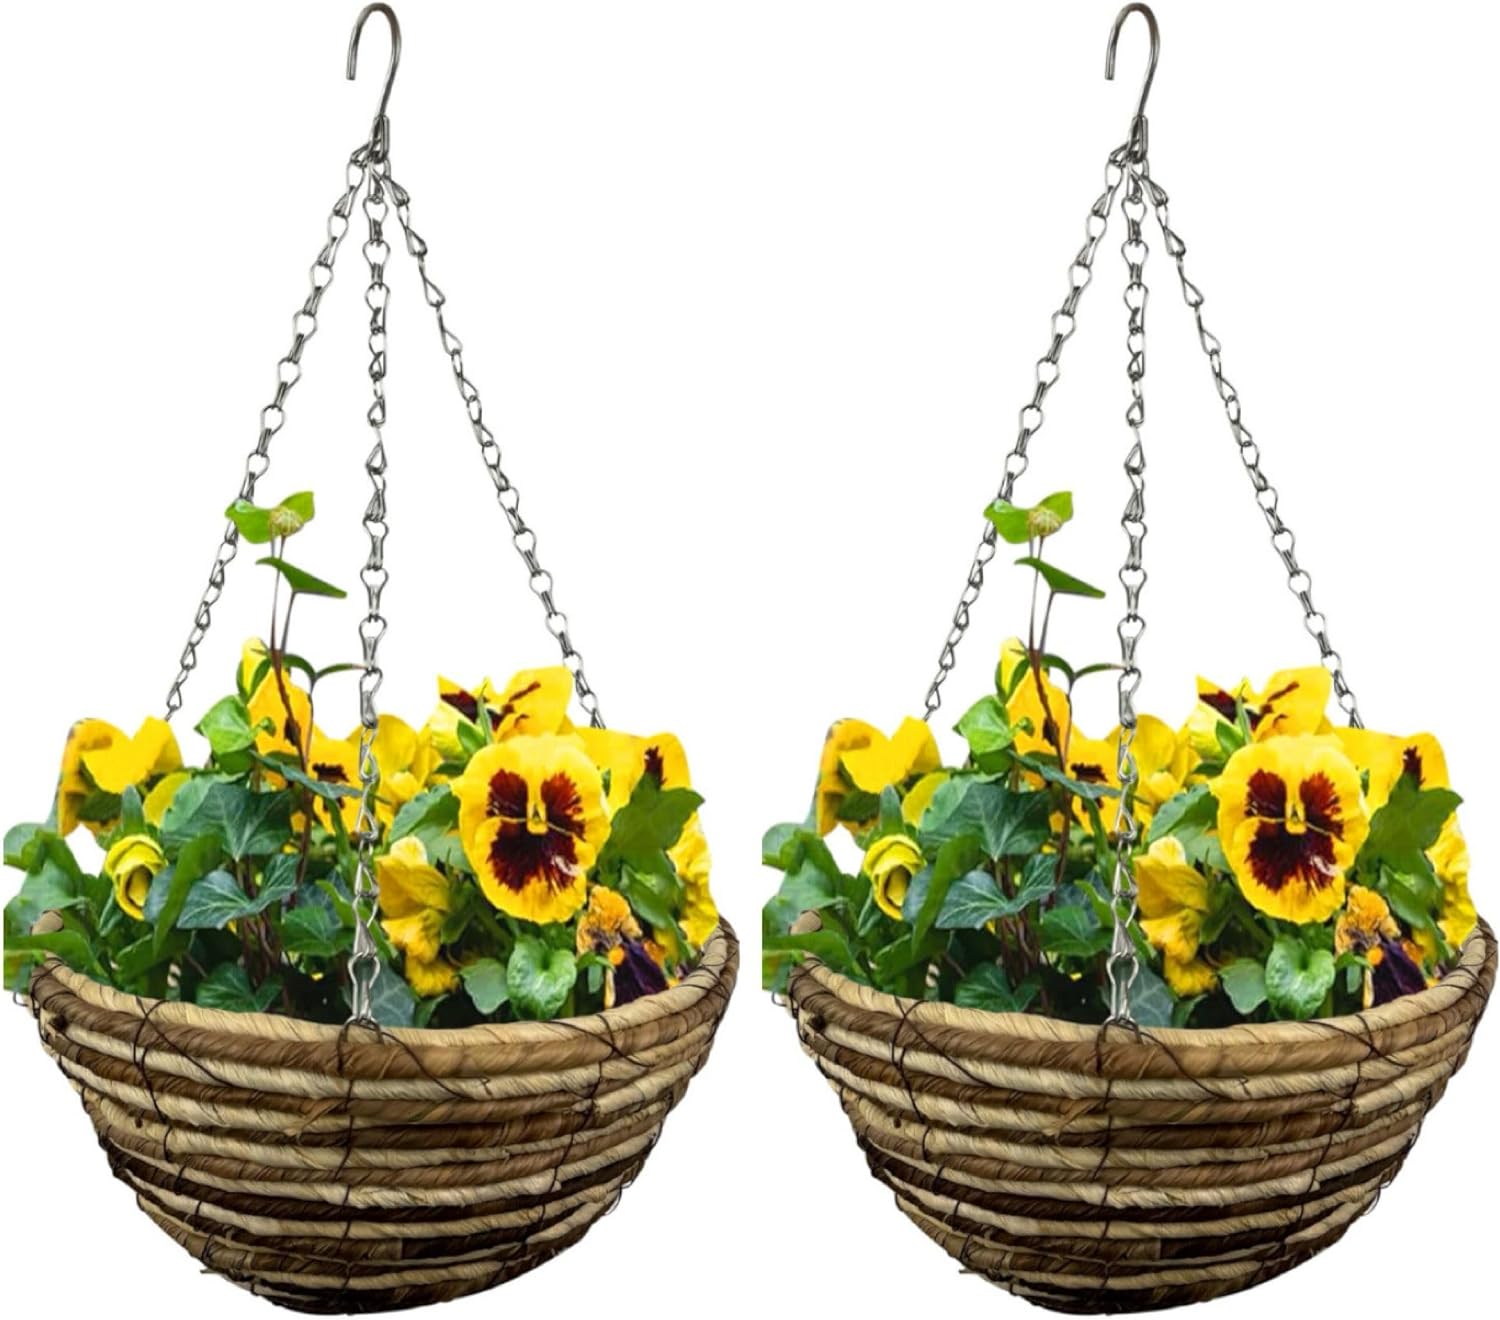 ADEPTNA Set of 2 Round Garden Hanging Baskets with Lined and Detachable Hanging Chain - Natural Basket Hanging Plants Flower Planter Pot (12’’ WICKER ROPE BASKETS)